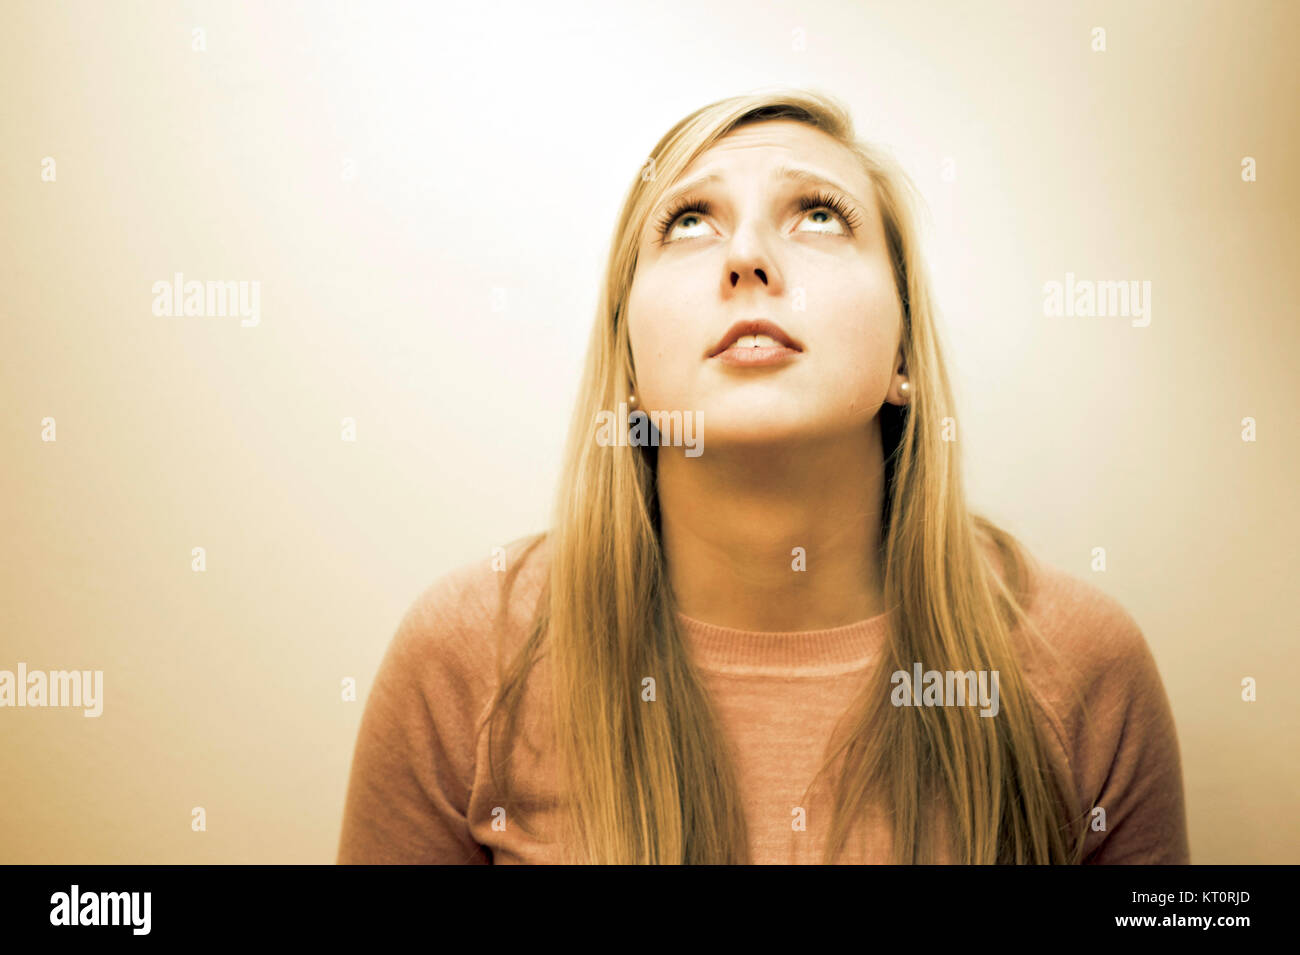 blonde young woman looking upward with a worried or wishful expression Stock Photo